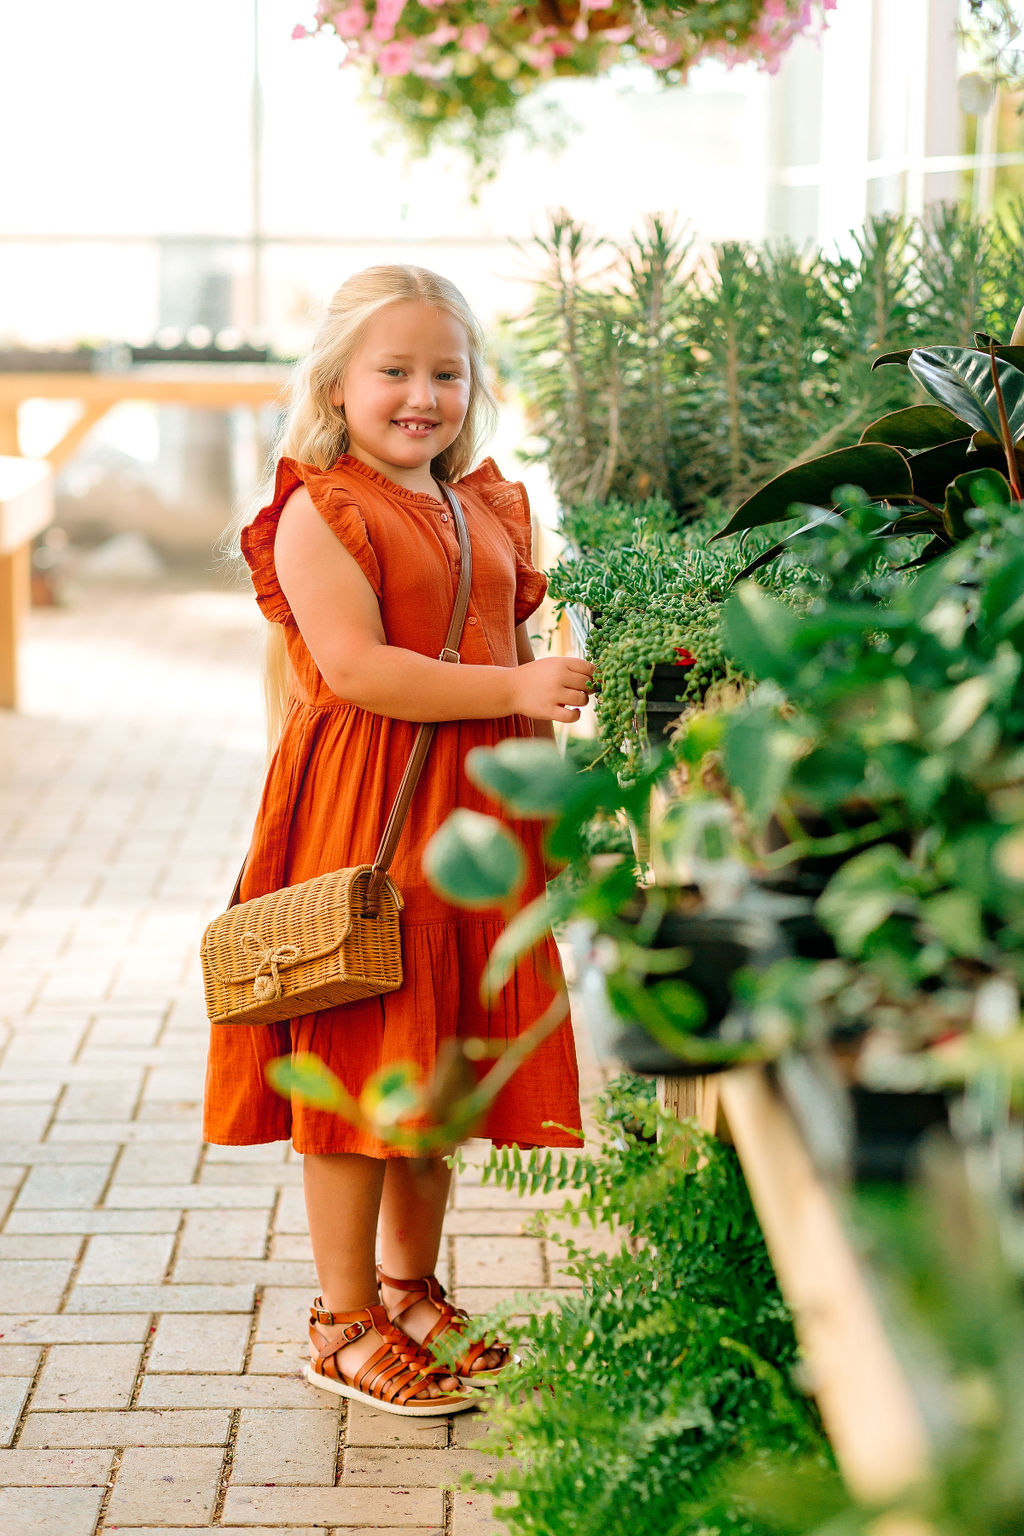 A young girl wearing a red dress browses some plants inside a bright greenhouse